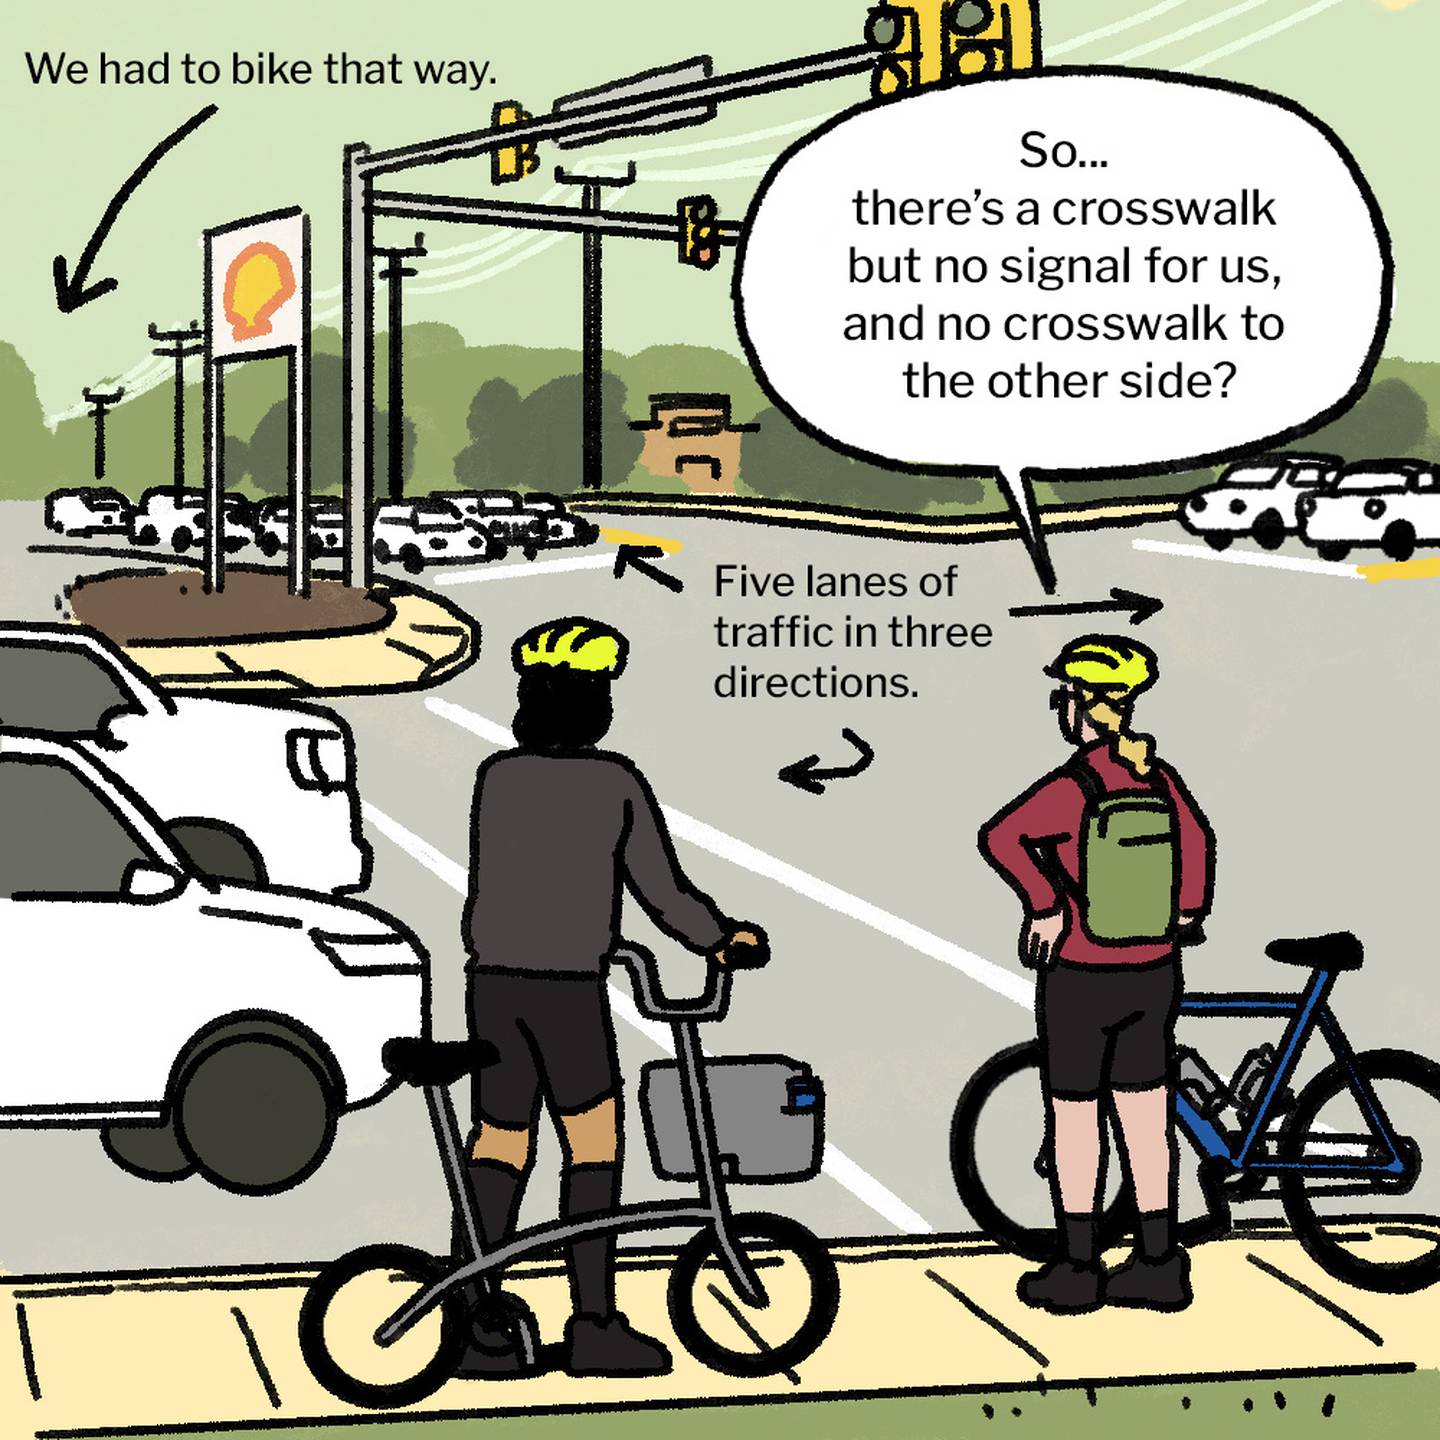 Illustration of man and woman with bikes standing on sidewalk next to car-filled intersection of two five-lane streets next to a gas station and a strip mall. The woman says "So... there's a crosswalk but no signal for us, and no crosswalk to the other side?"